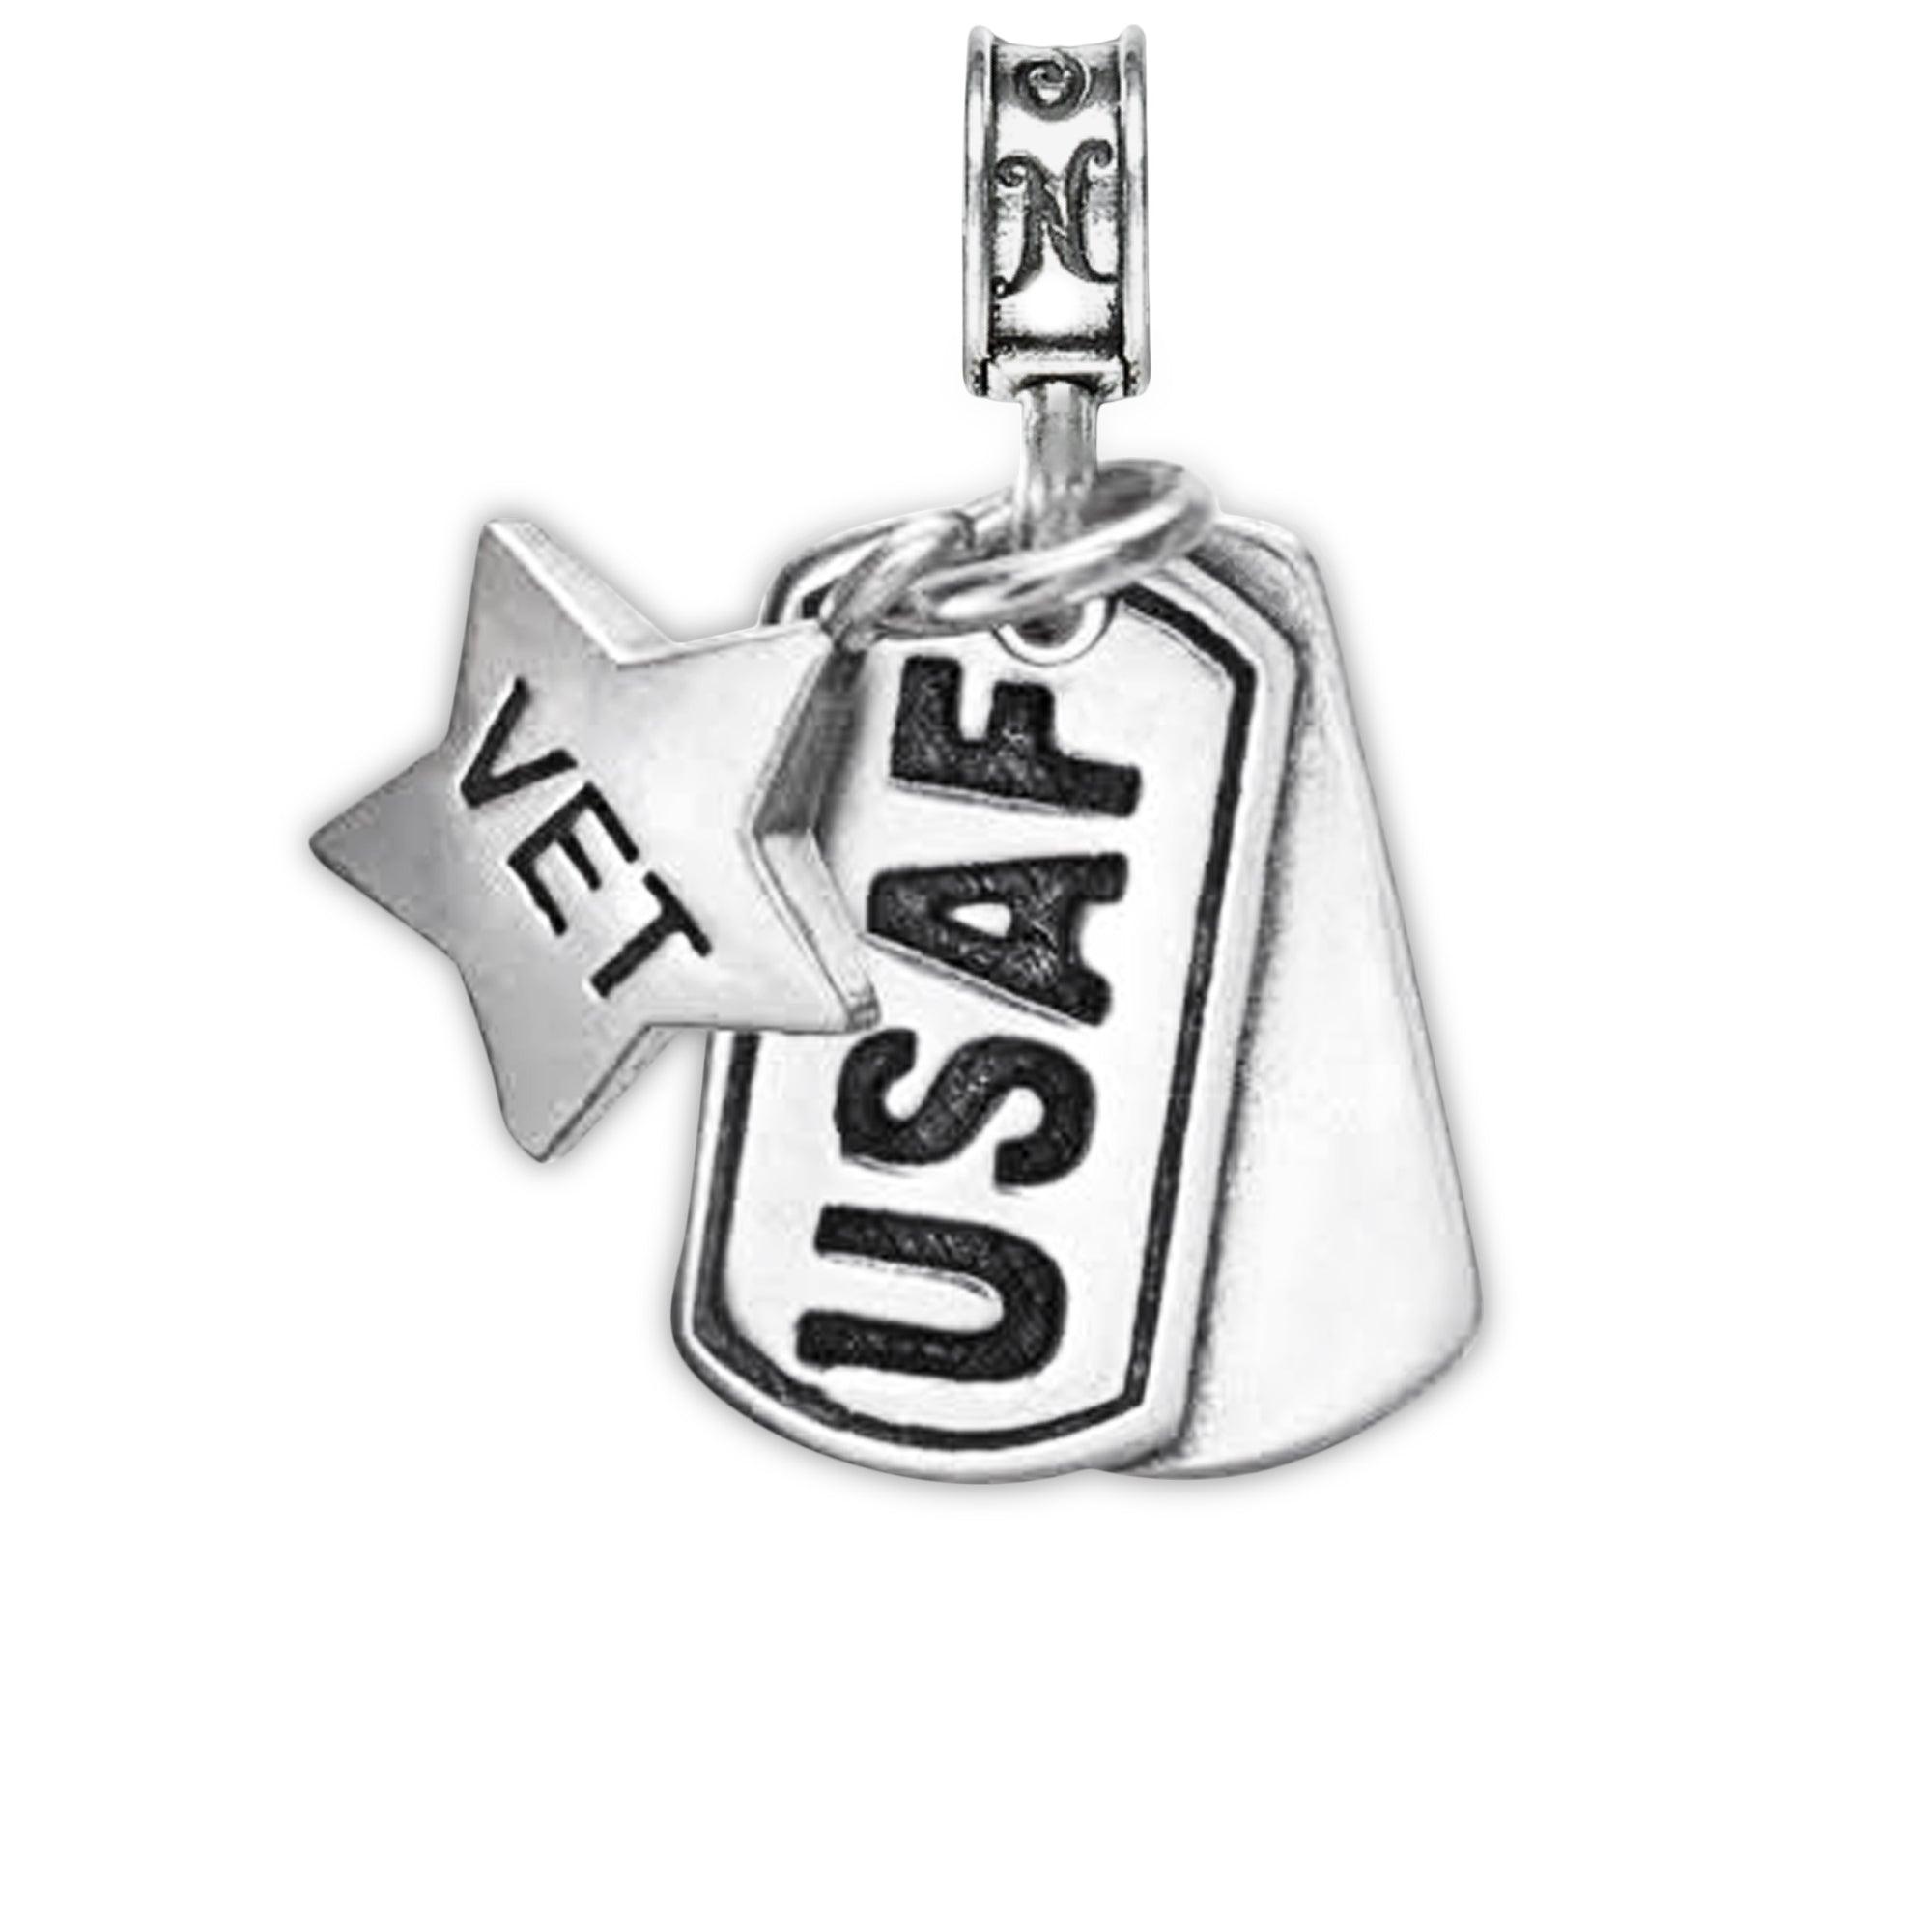 Military Jewelry, Military Charms, Military Gifts, USAF, United States Air Force, USAF Dog Tag, United States Air Force Dog Tag Air Force Veteran